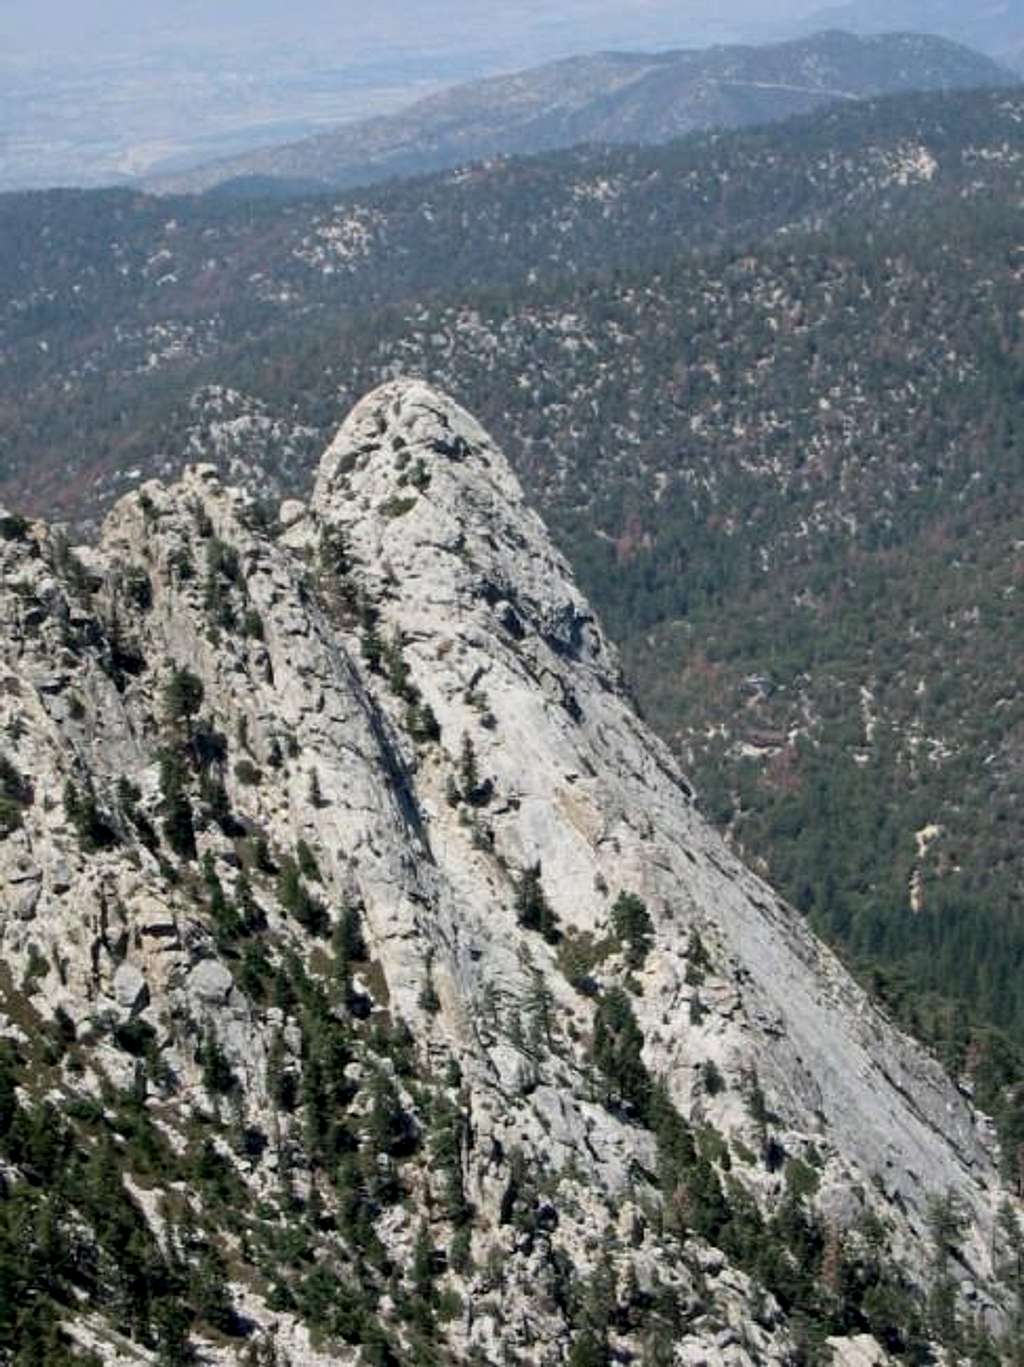 Tahquitz Rock as viewed from...